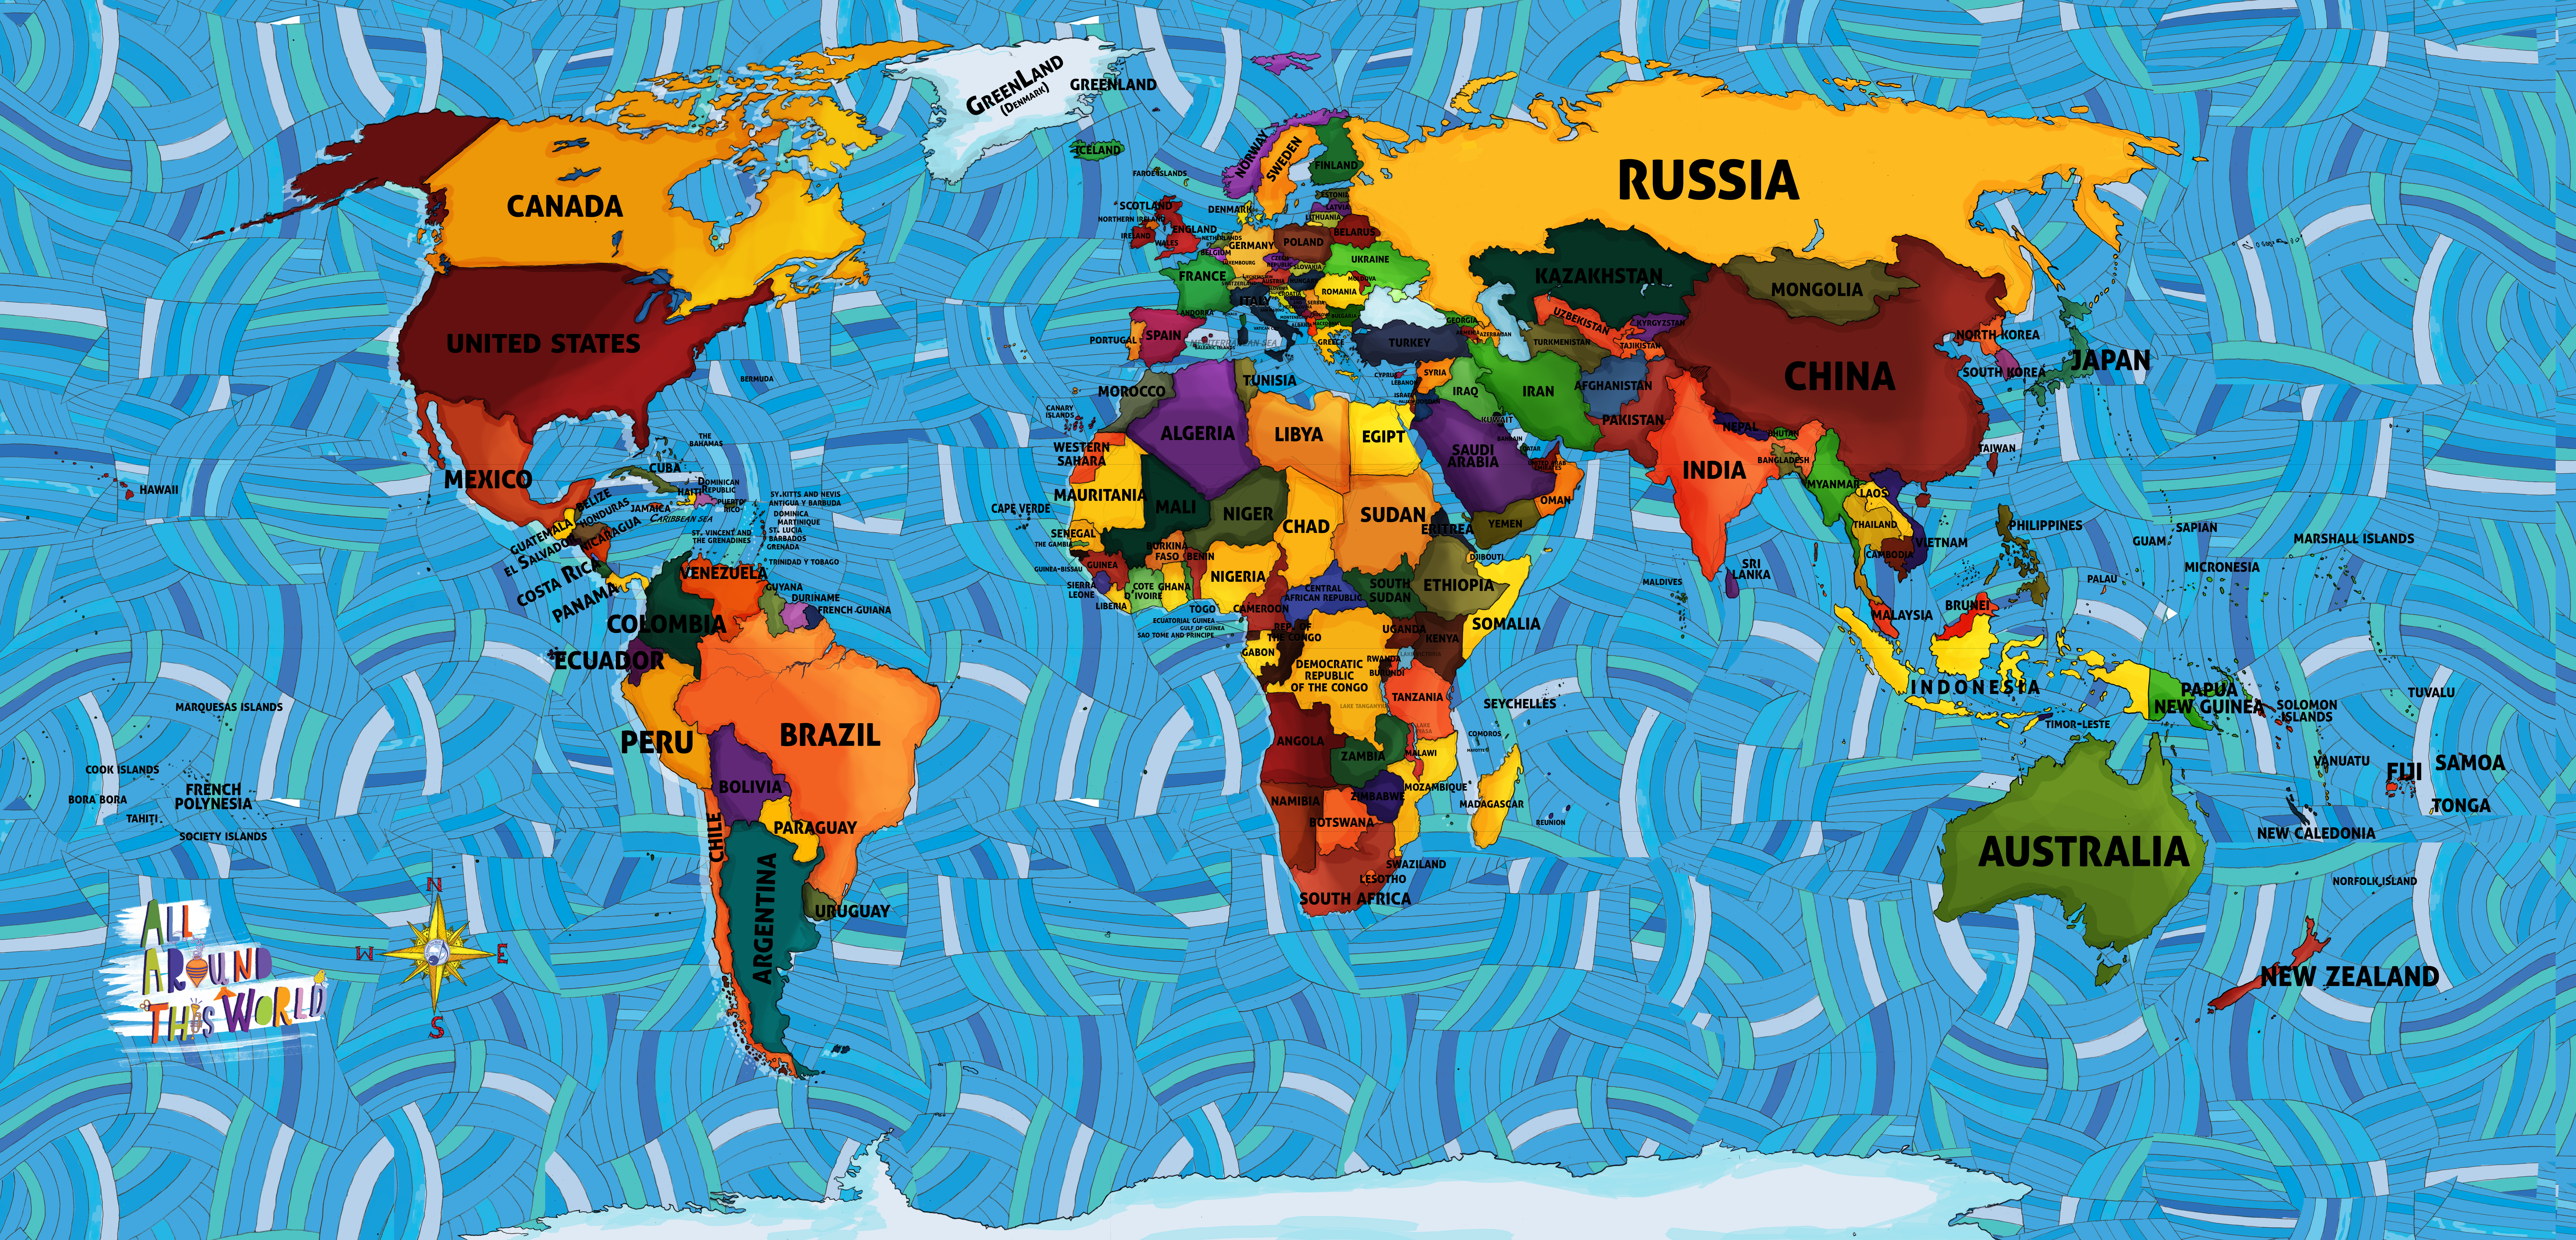 All Around This World Global "Everywhere Map" -- Explore Our Multicultural Curriculum for Kids